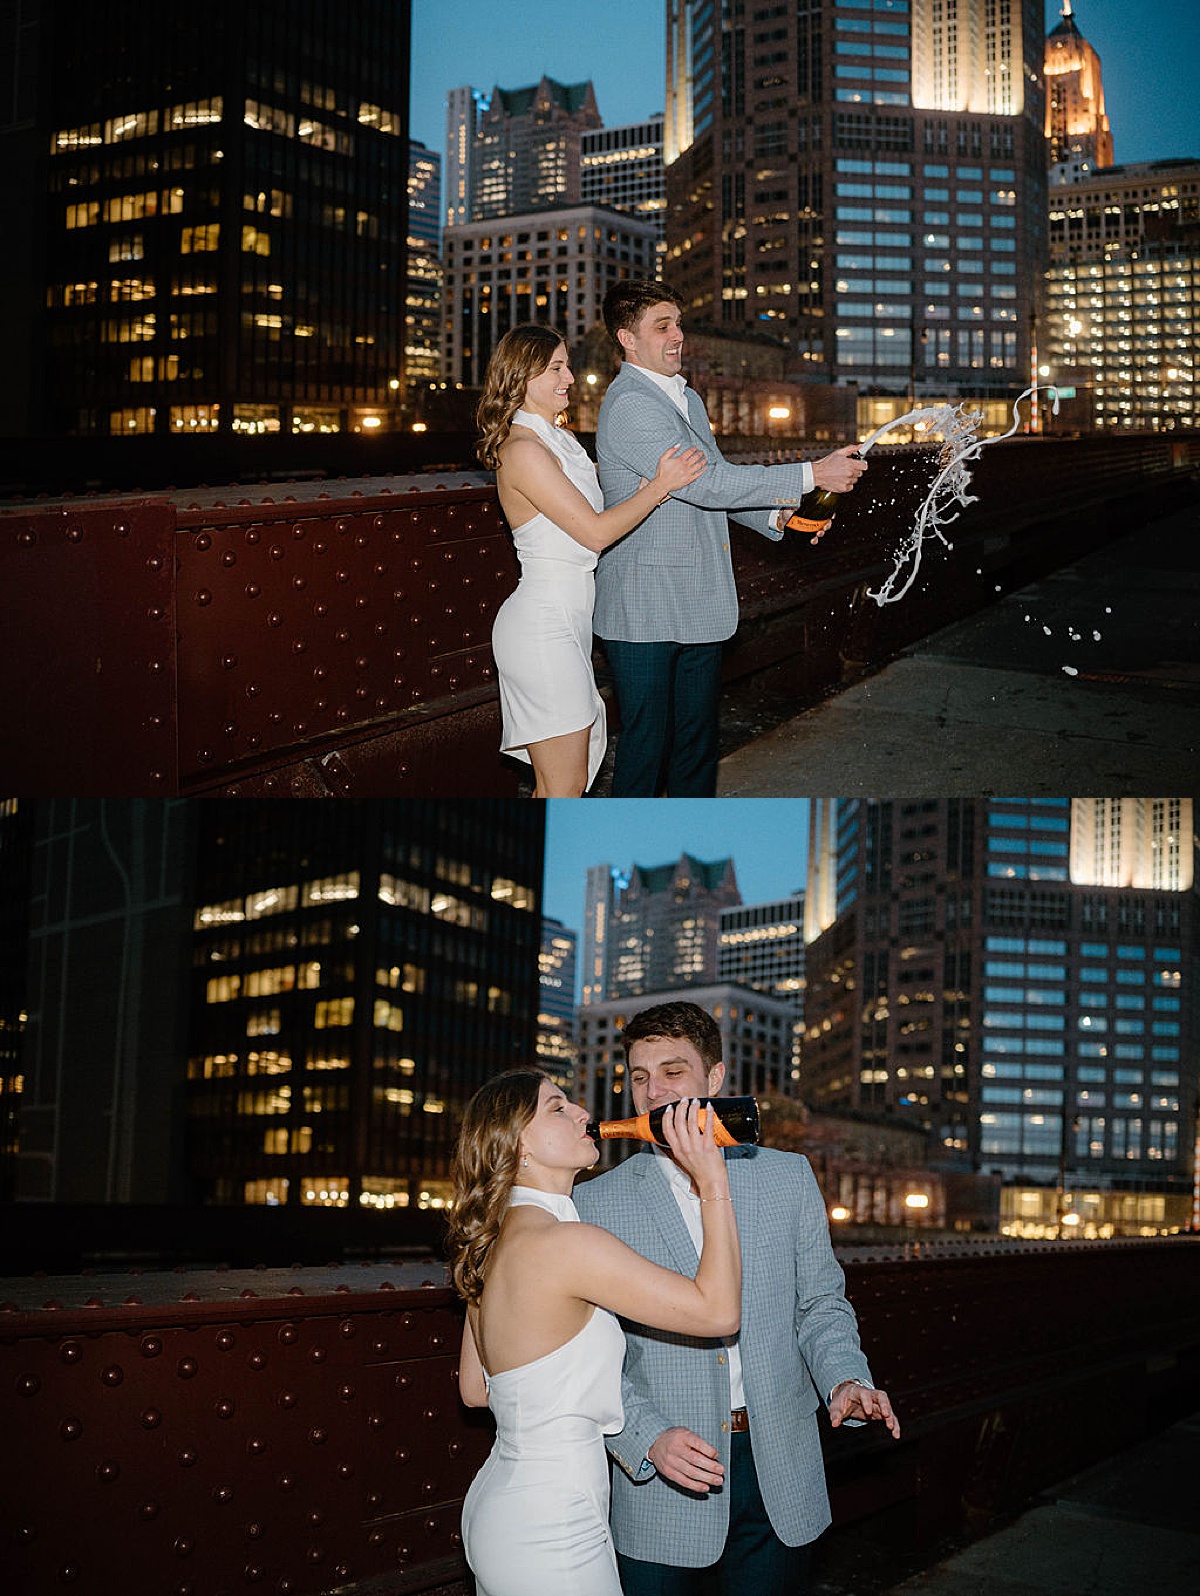 engaged couple pop a bottle of champagne after shoot with Indigo Lace Collective inyline twilight Chicago sk